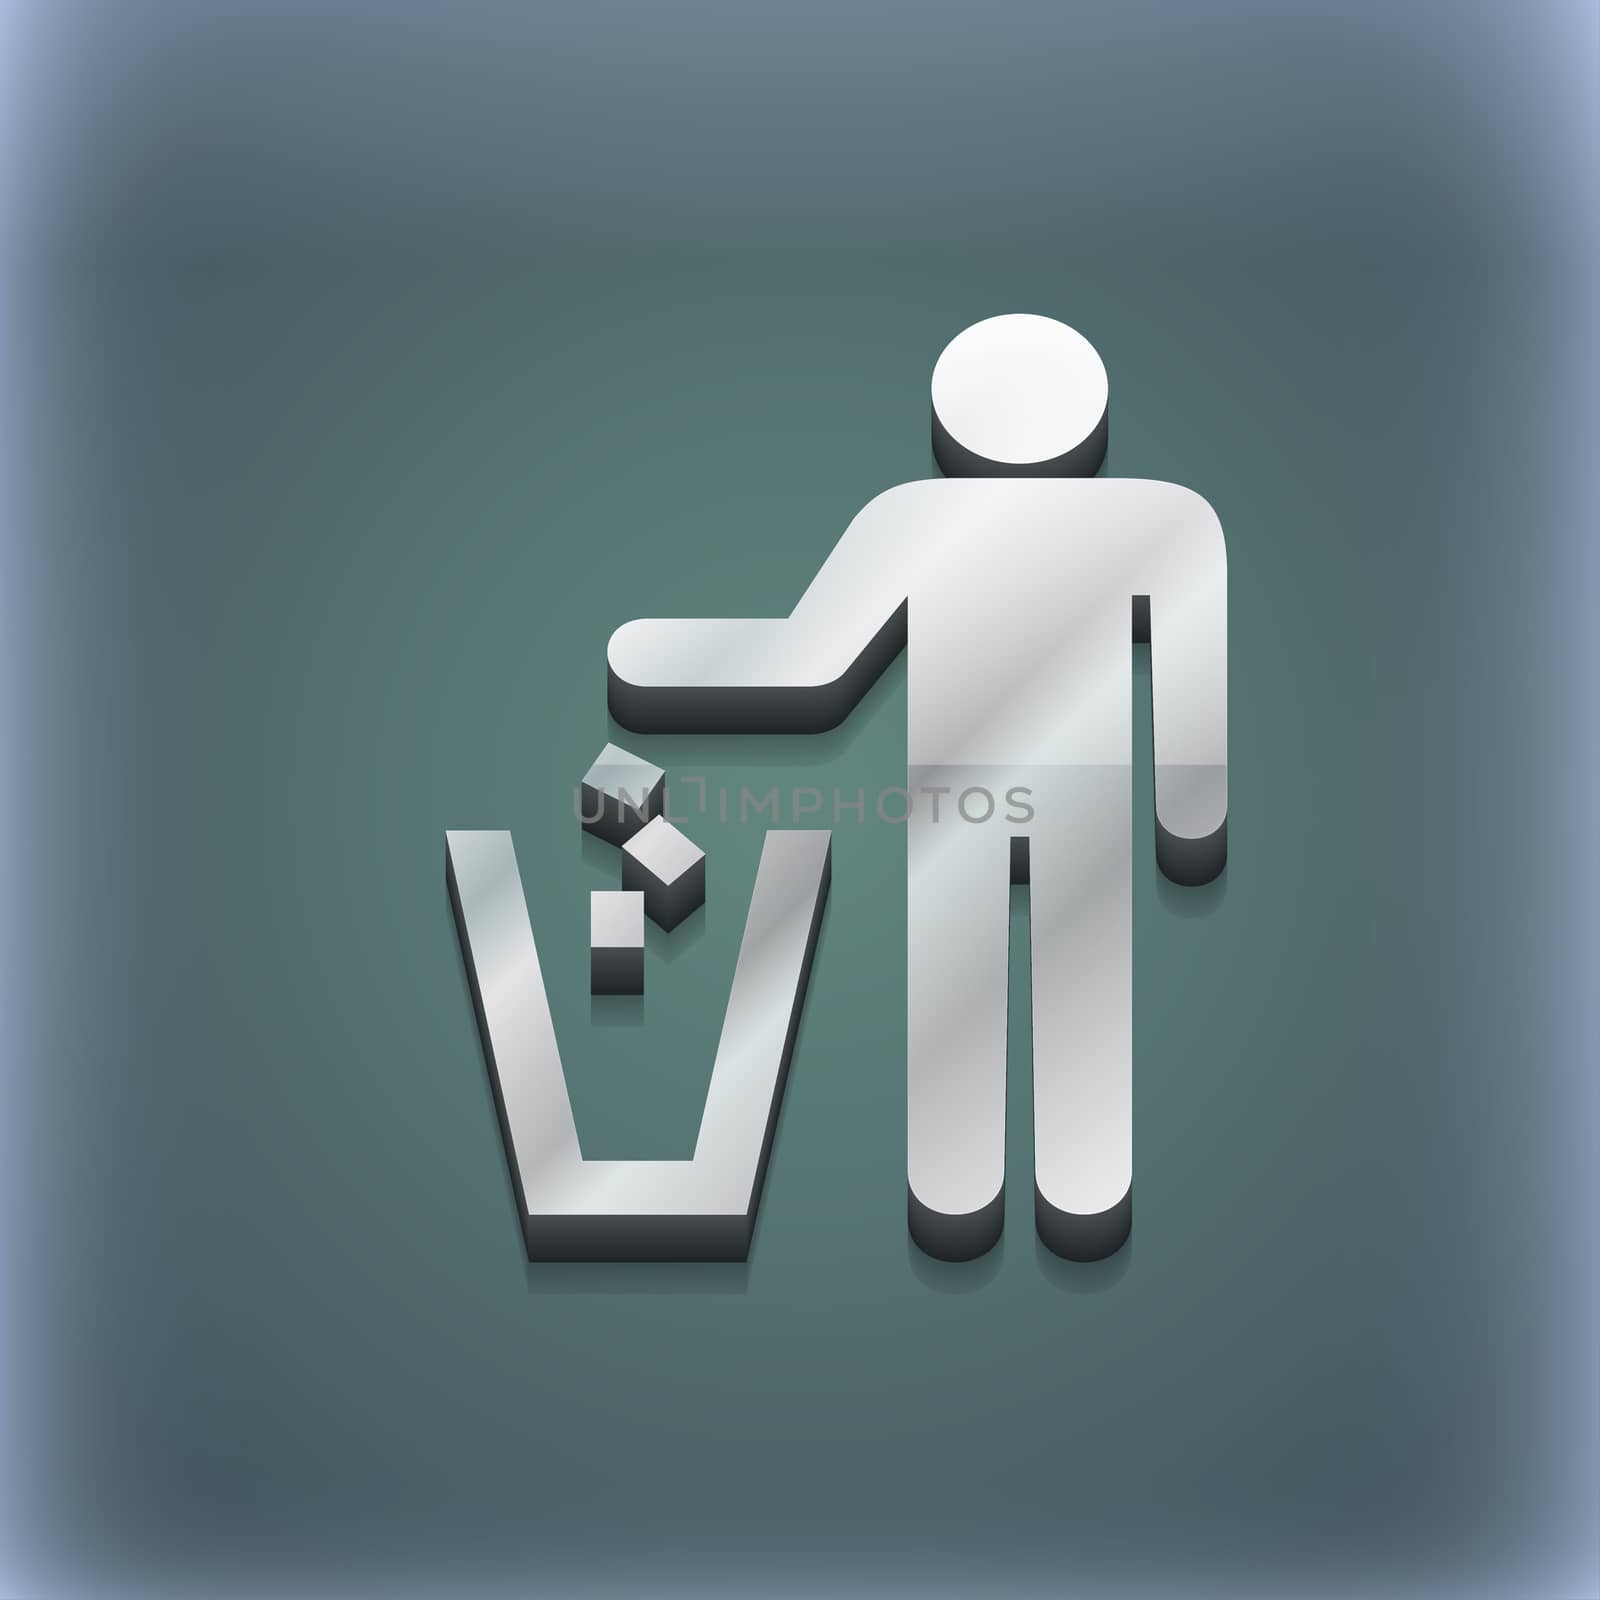 throw away the trash icon symbol. 3D style. Trendy, modern design with space for your text illustration. Raster version